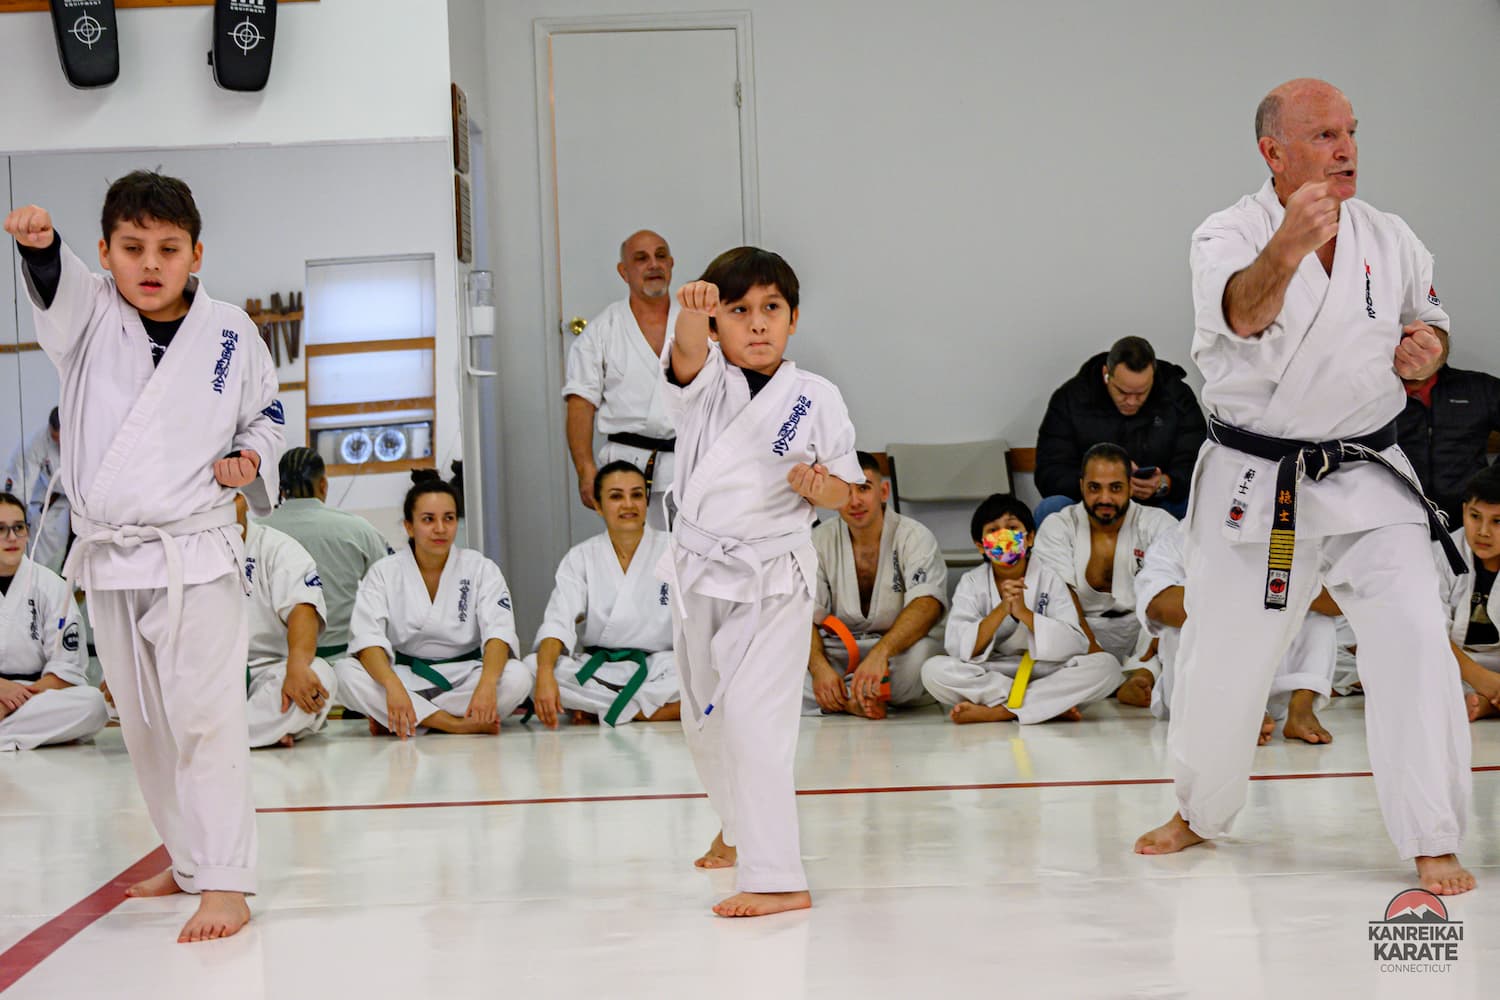 Is Karate Good Exercise The Physical Benefits of Karate Martial Arts (1)